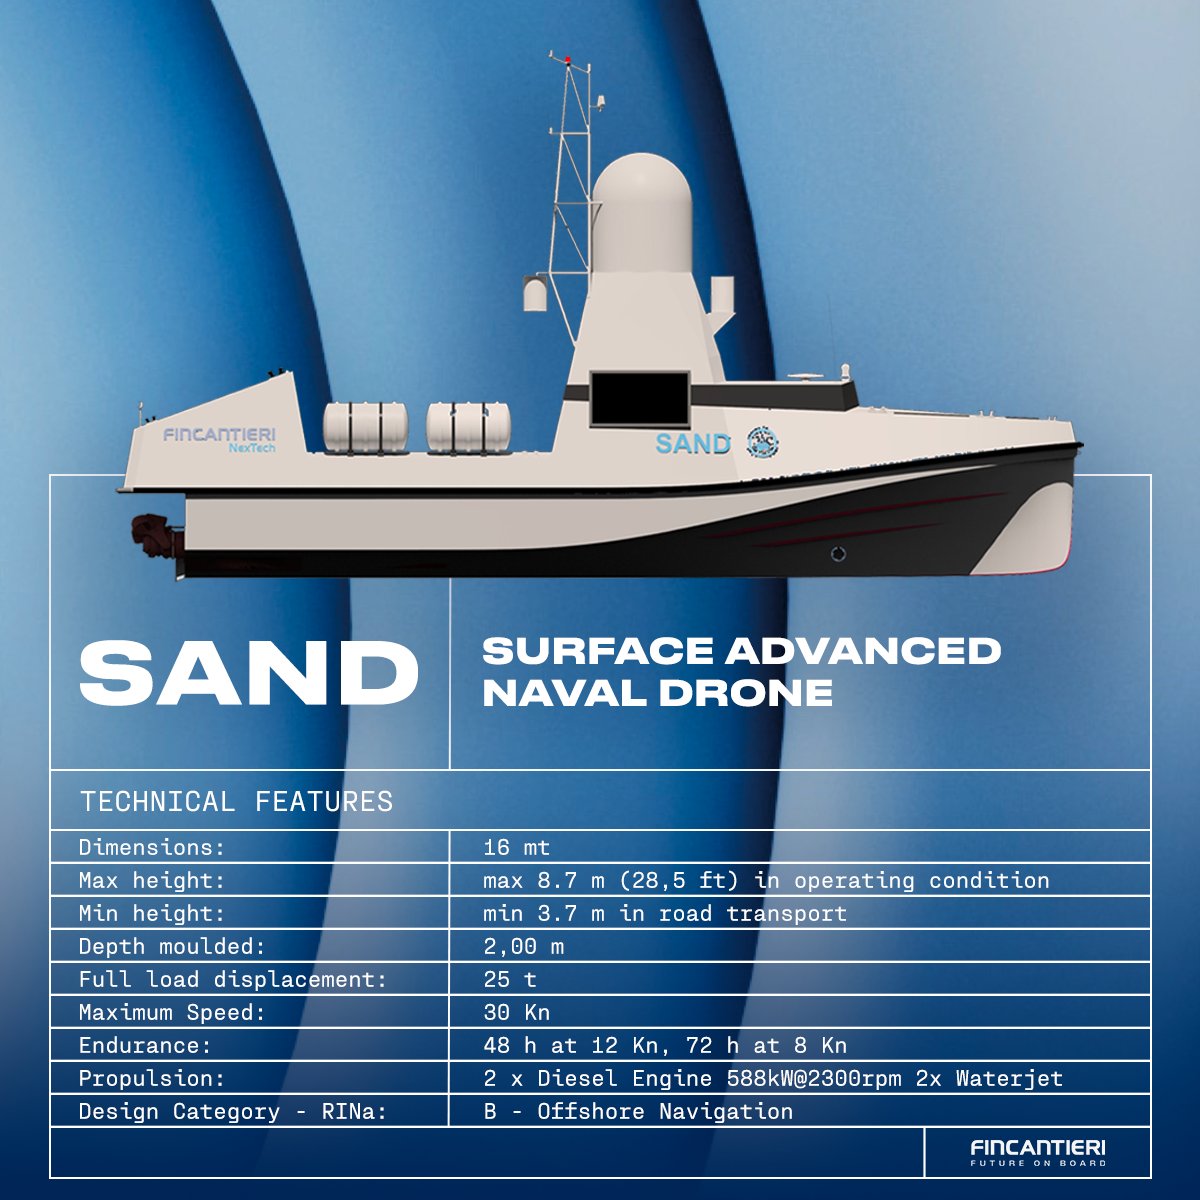 SAND represents the latest in #FincantieriNexTech's cutting-edge solutions for #Unmanned and #AutonomousSystems. The SAND platform is designed to accomplish various mission types, including Naval Mine Warfare and Anti-Submarine Warfare. Complex tasks are efficiently managed with…